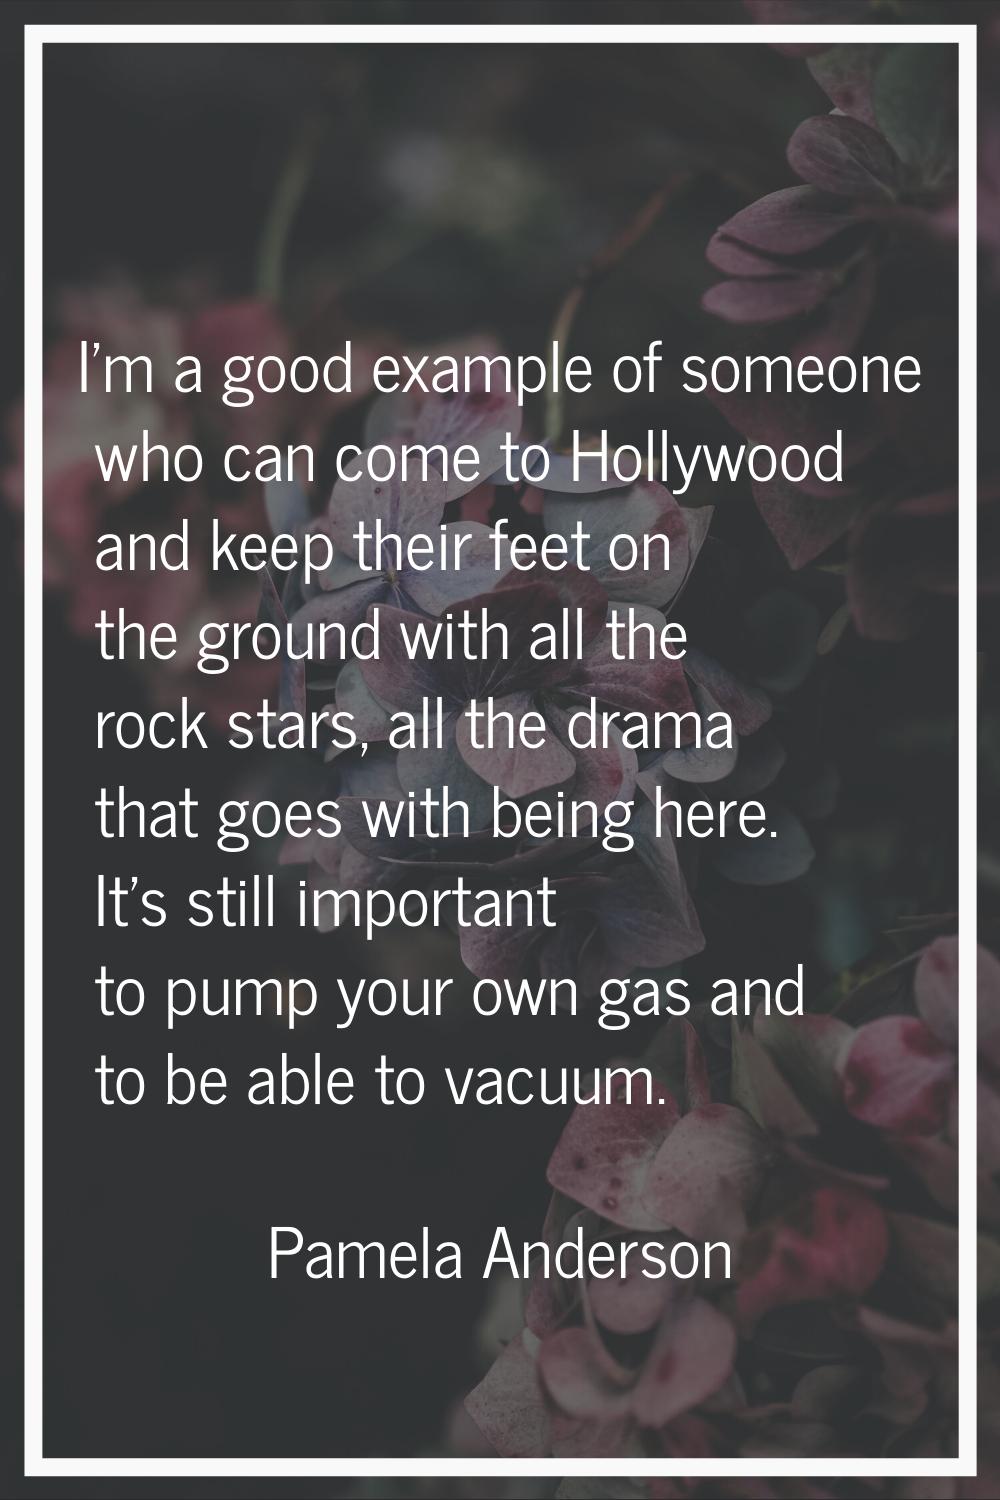 I'm a good example of someone who can come to Hollywood and keep their feet on the ground with all 